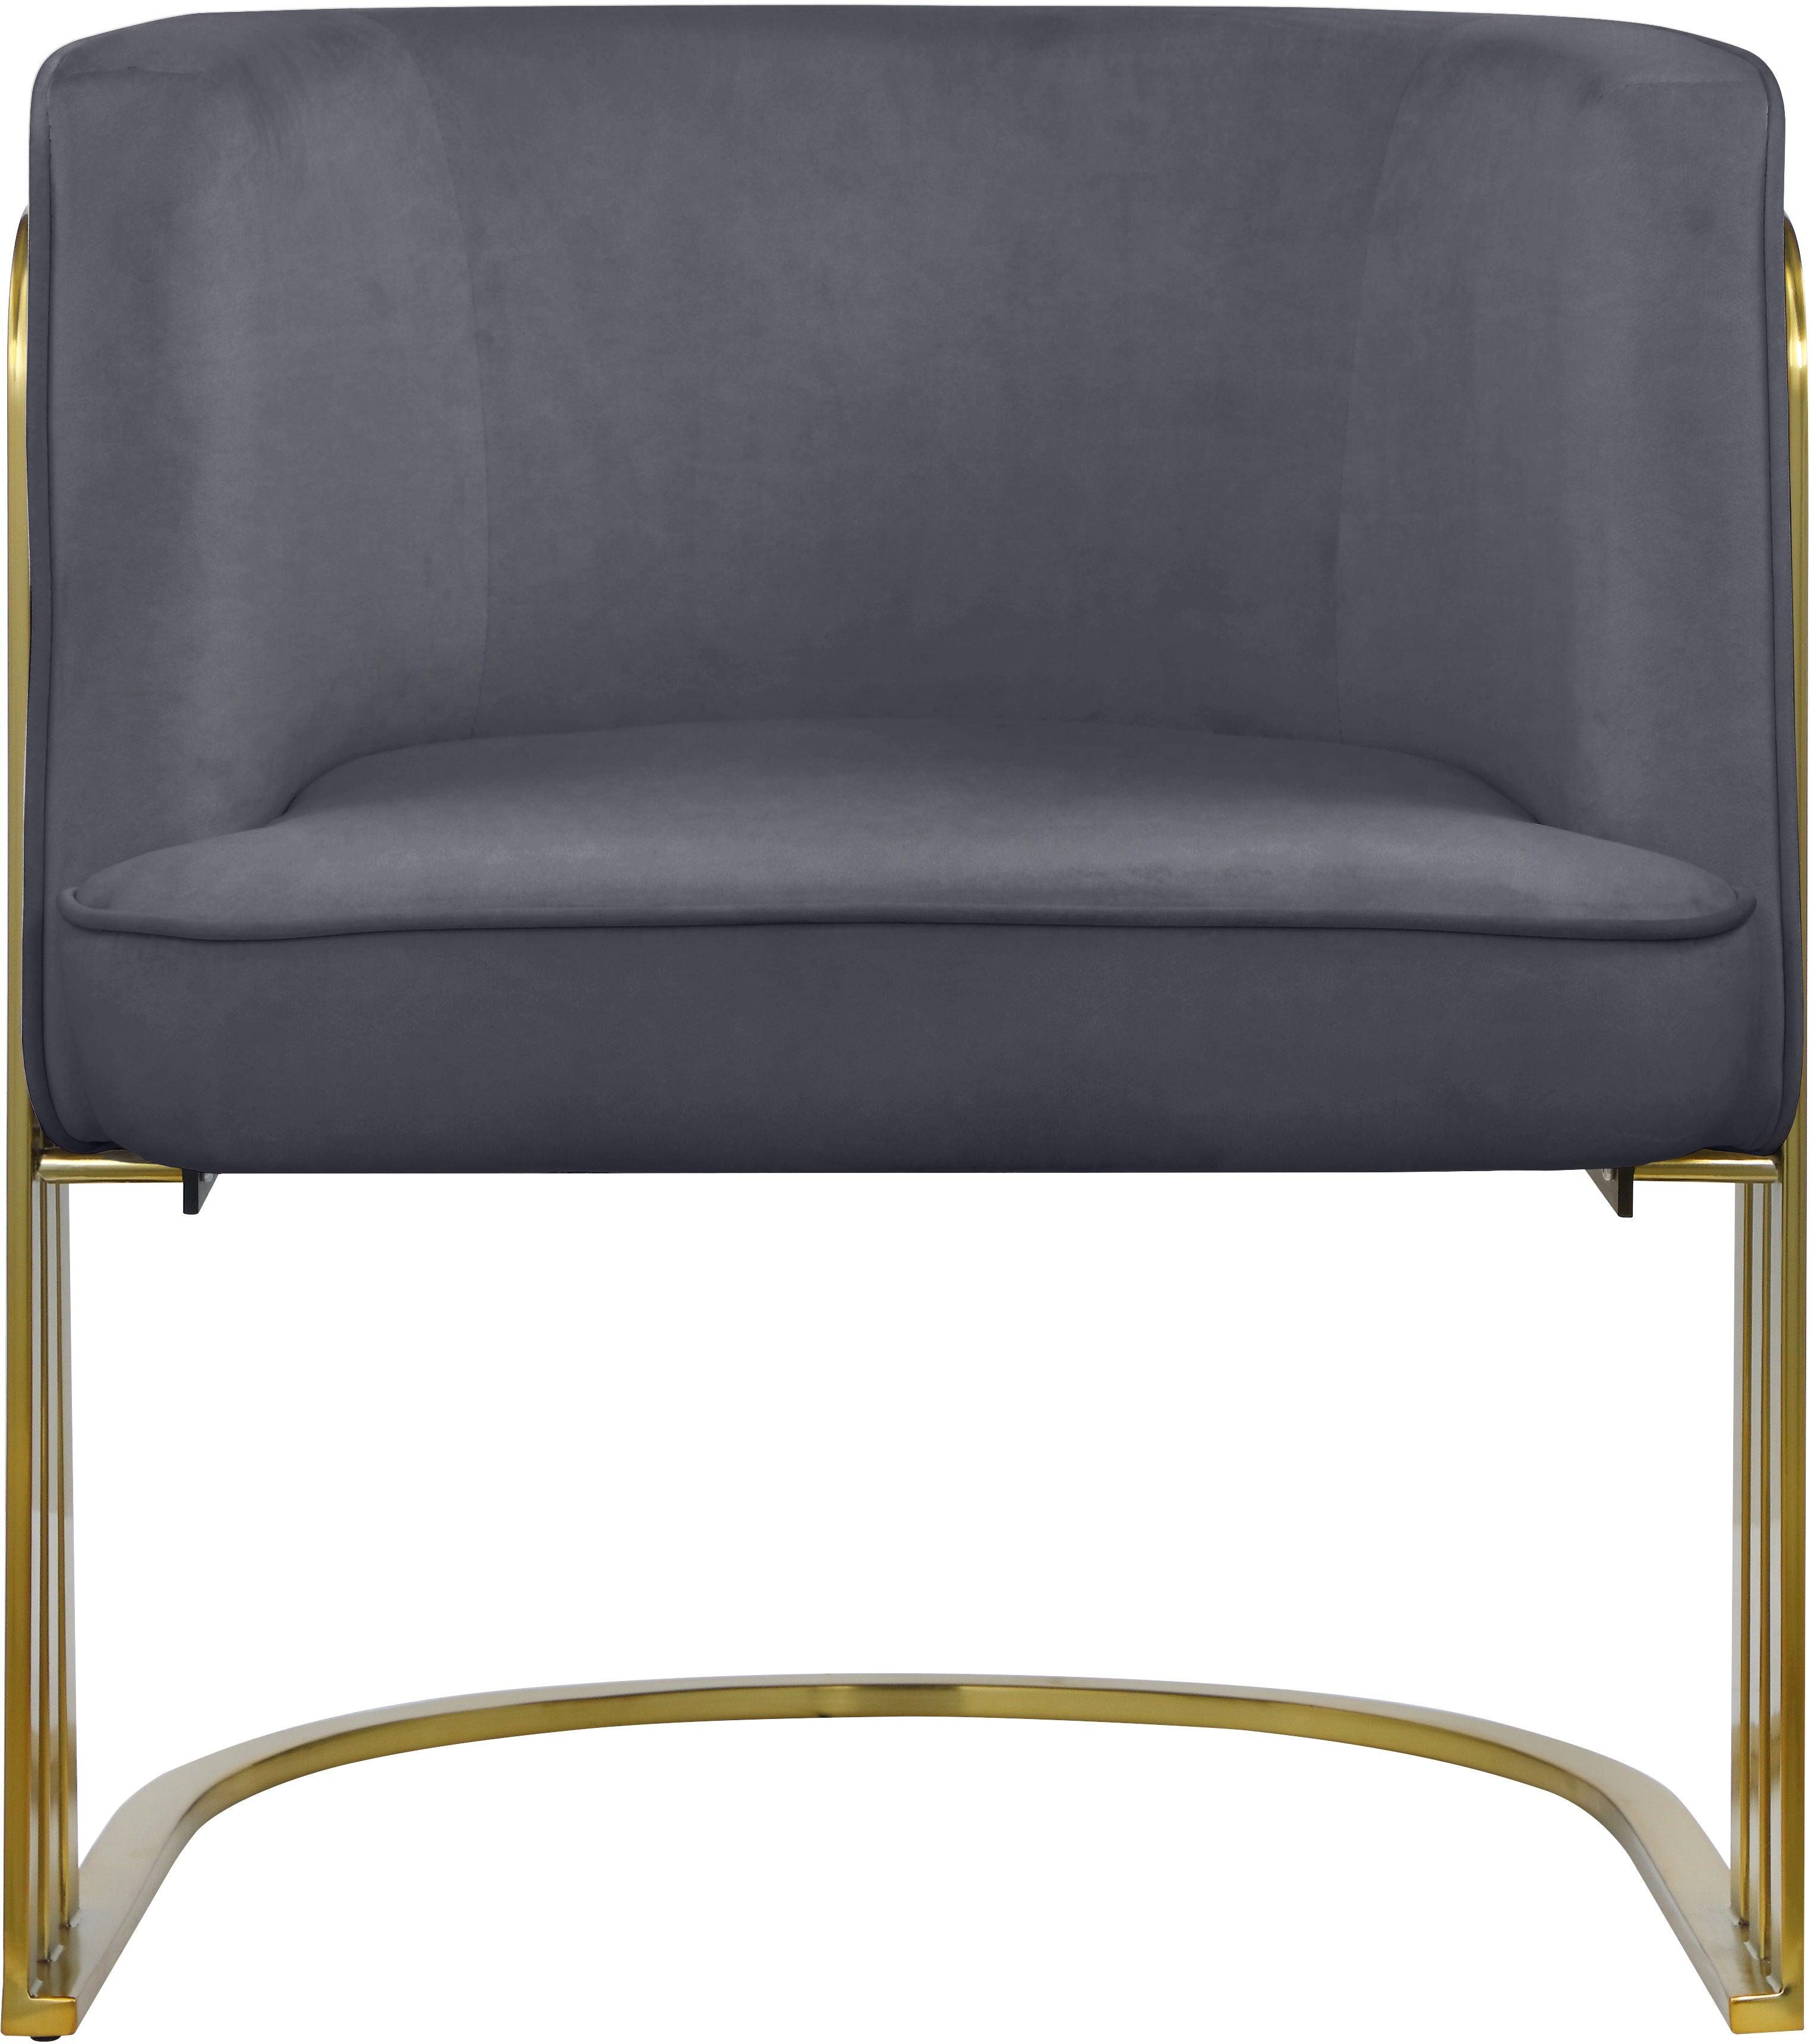 Meridian Furniture - Rays - Accent Chair - 5th Avenue Furniture